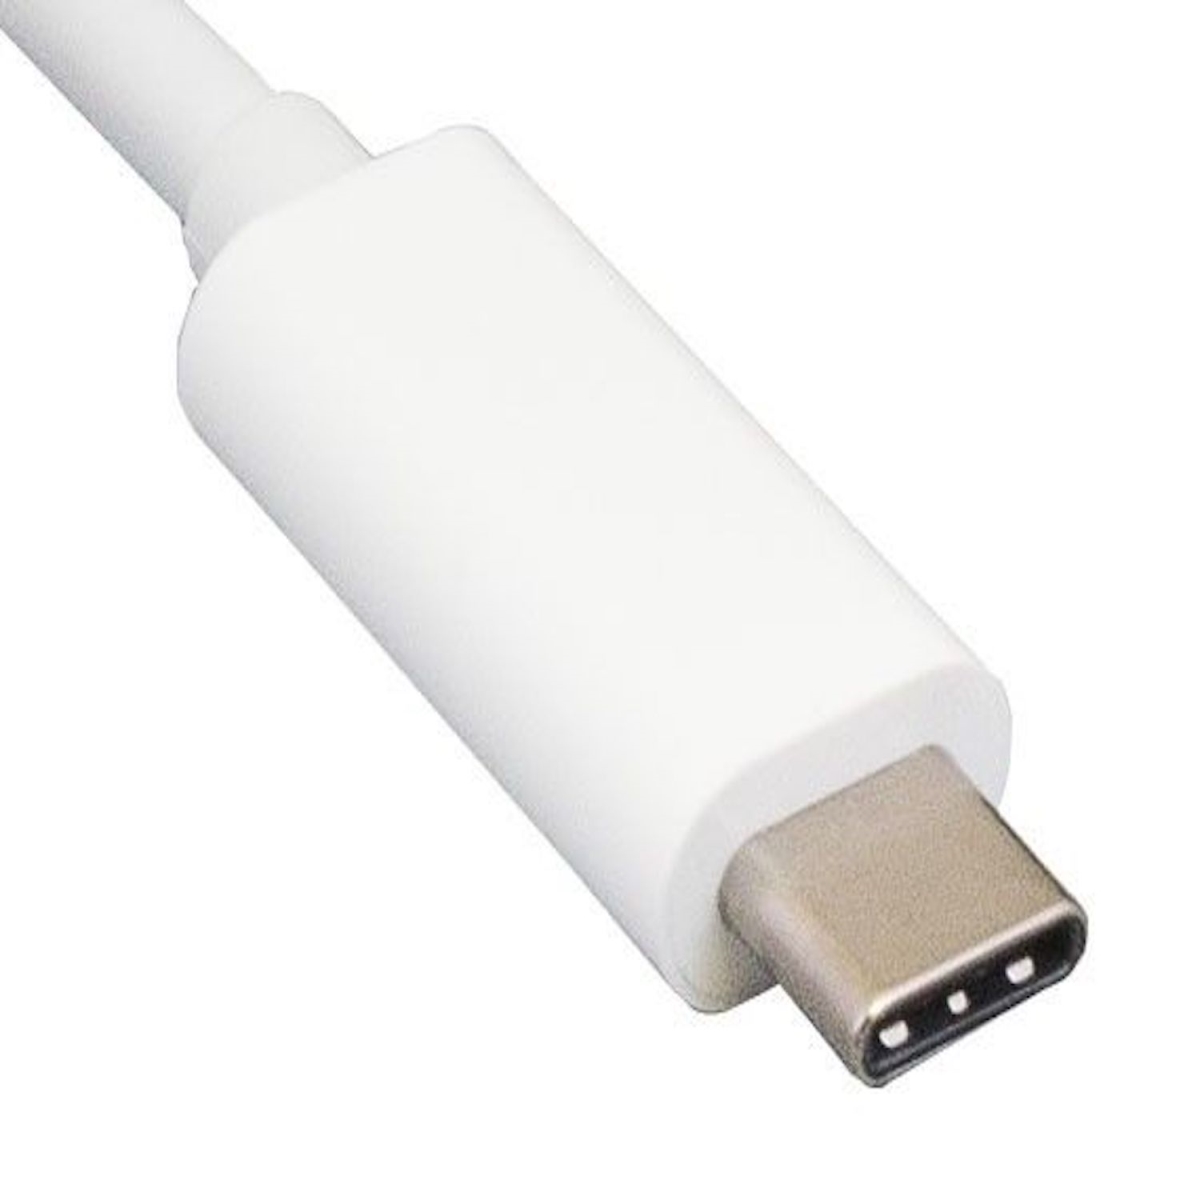 Picture of Sanoxy SNX-CBLR-UC205-8200 USB 3.1 Type C to 4K HDMI Plus USB 3.0 A Plus Type C Data&Charging Adapter